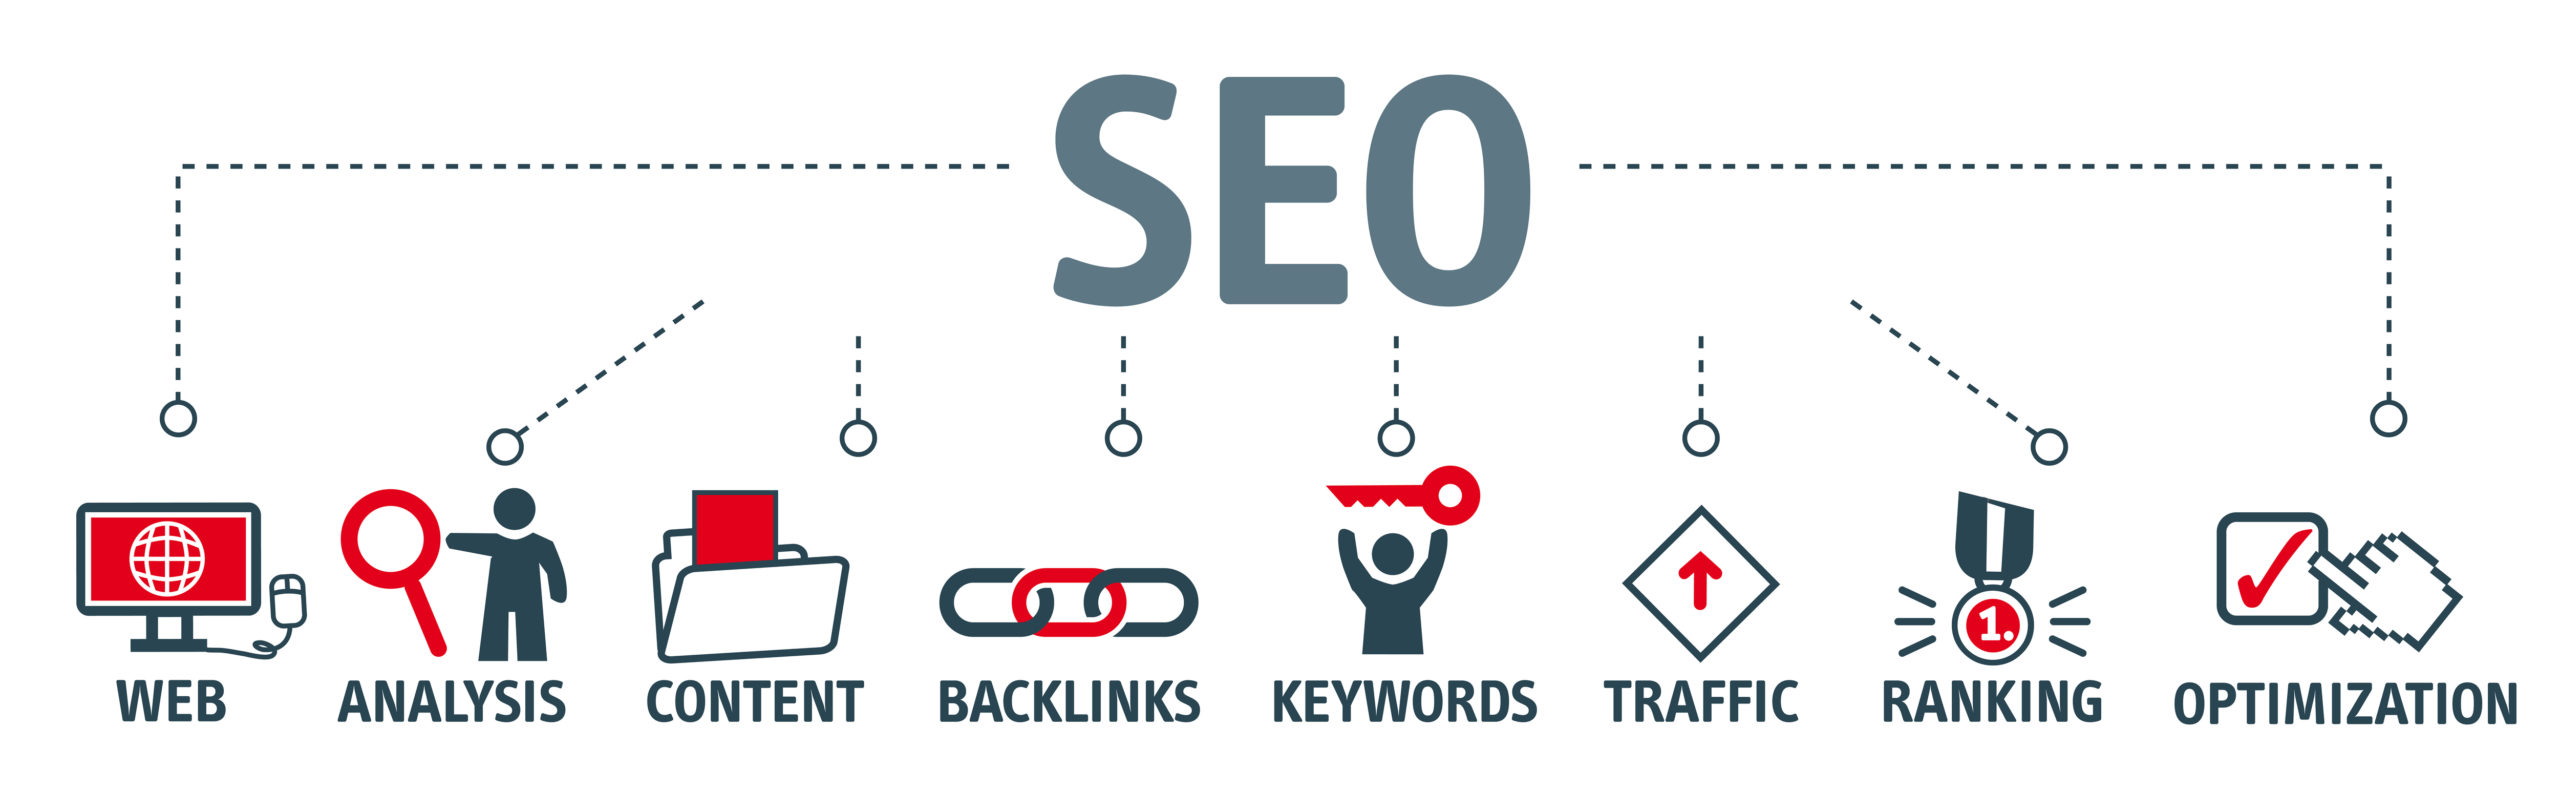 How does SEO work